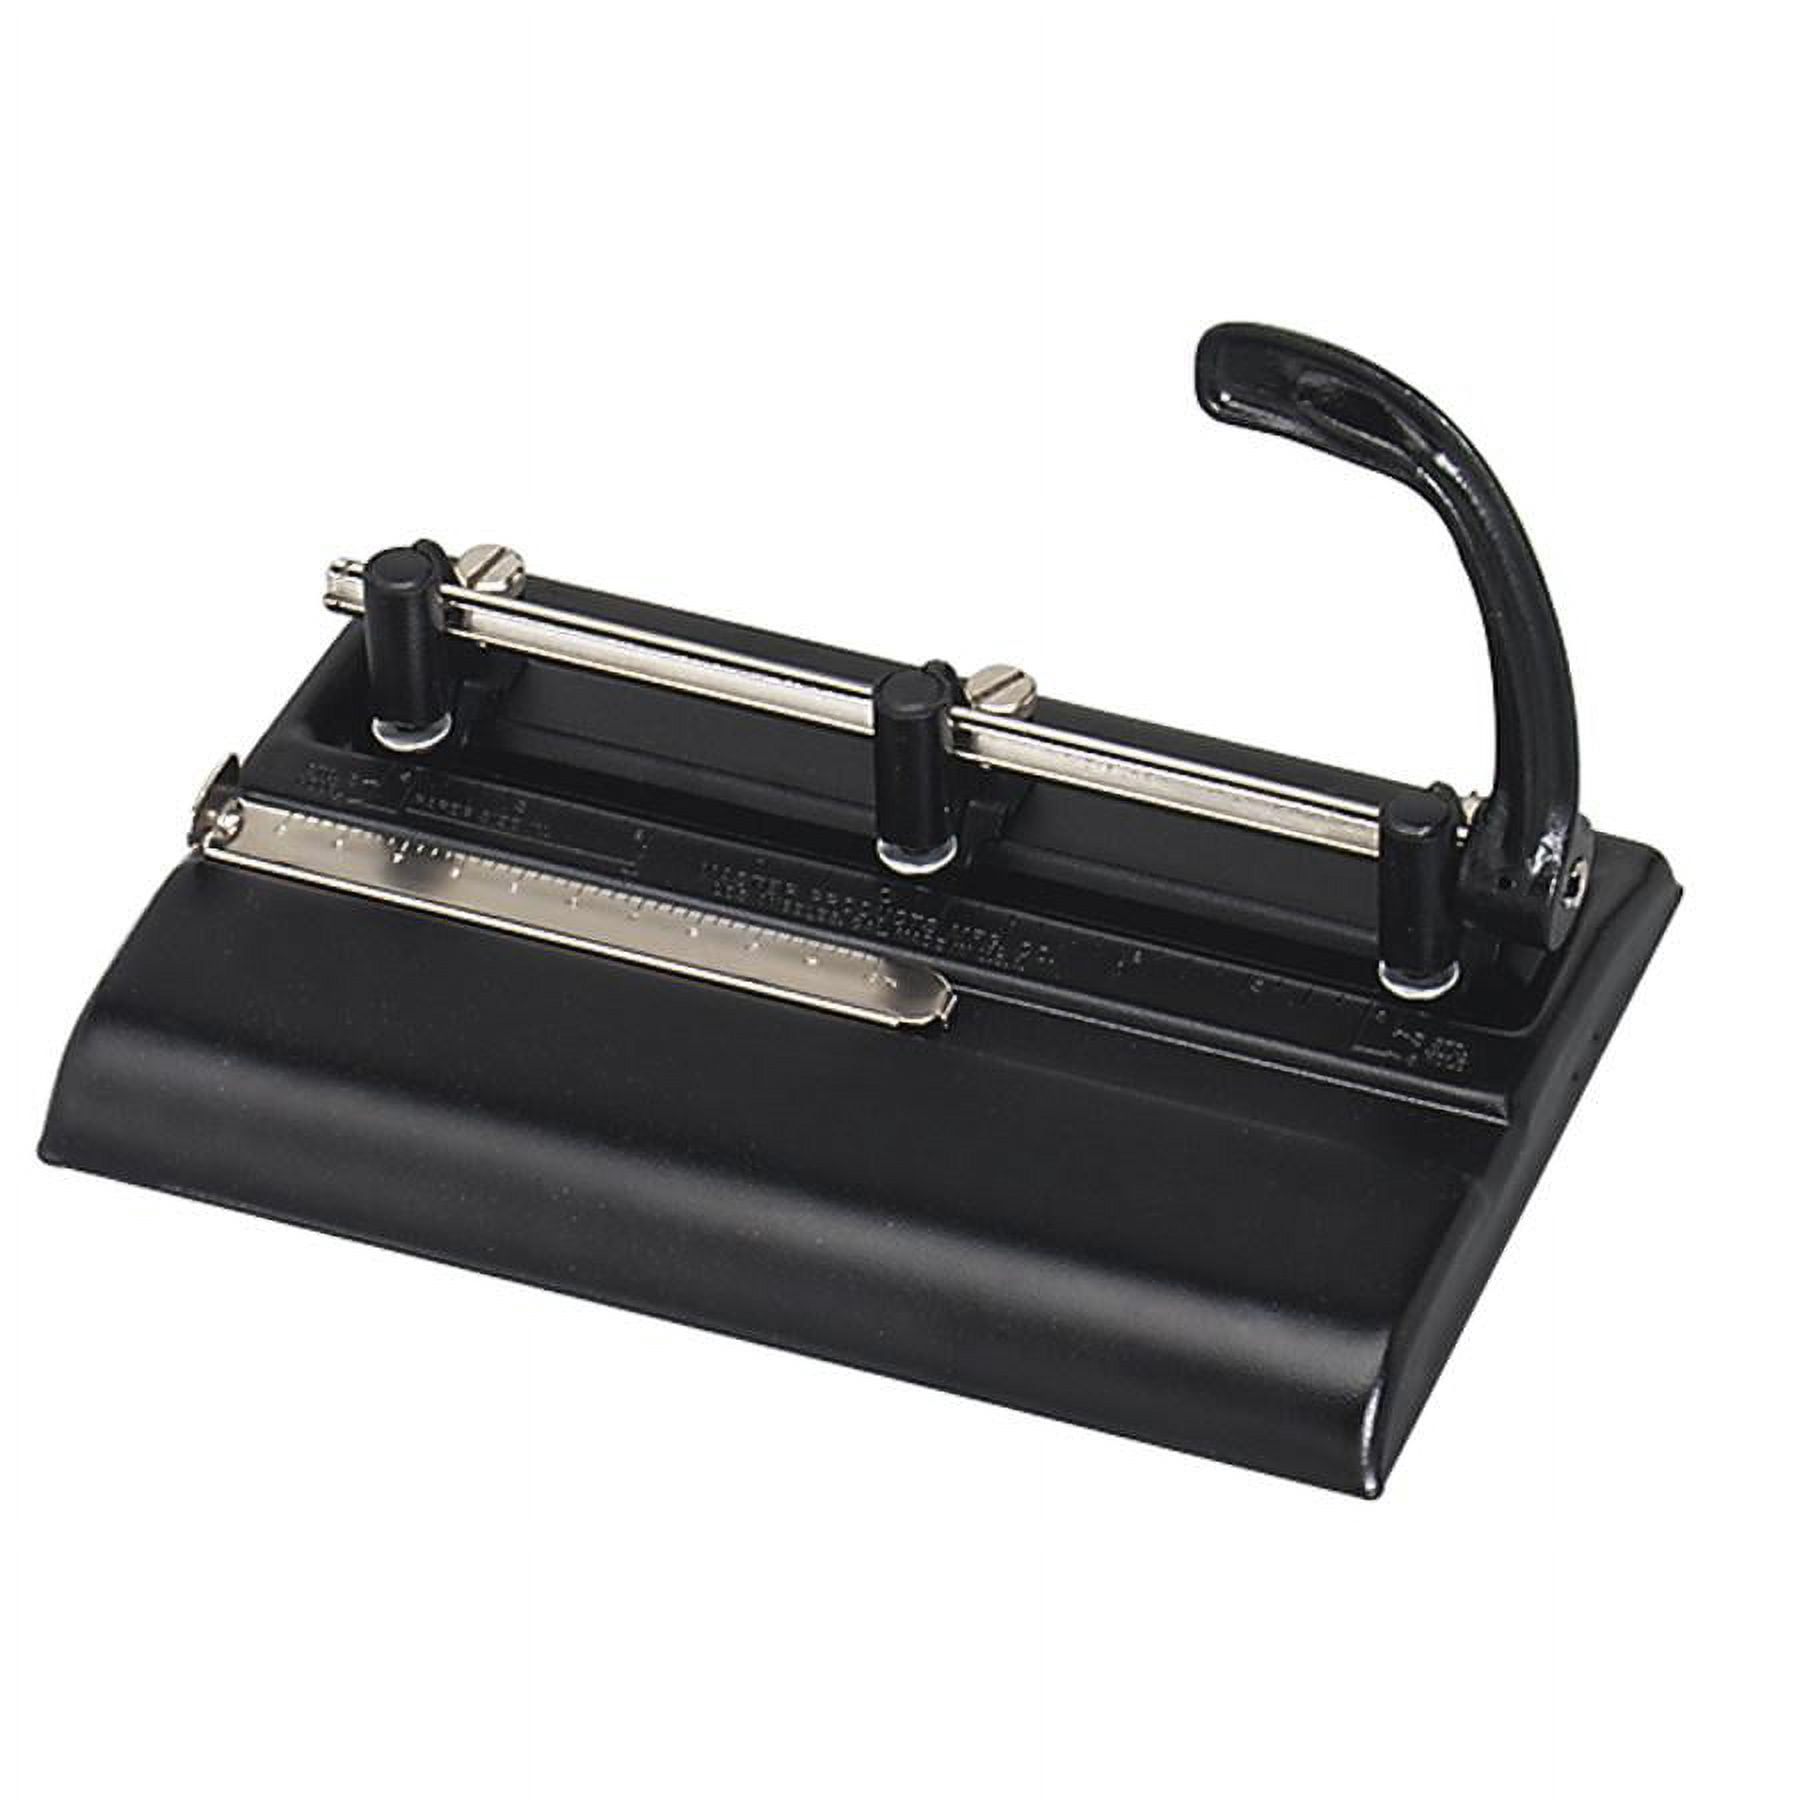  Heavy Duty 3 Hole Punch Heavy Duty Adjustable 3 Hole Punch 30  Sheet Capacity Hole Puncher Black Metal Hole Puncher 3 Ring : Arts, Crafts  & Sewing